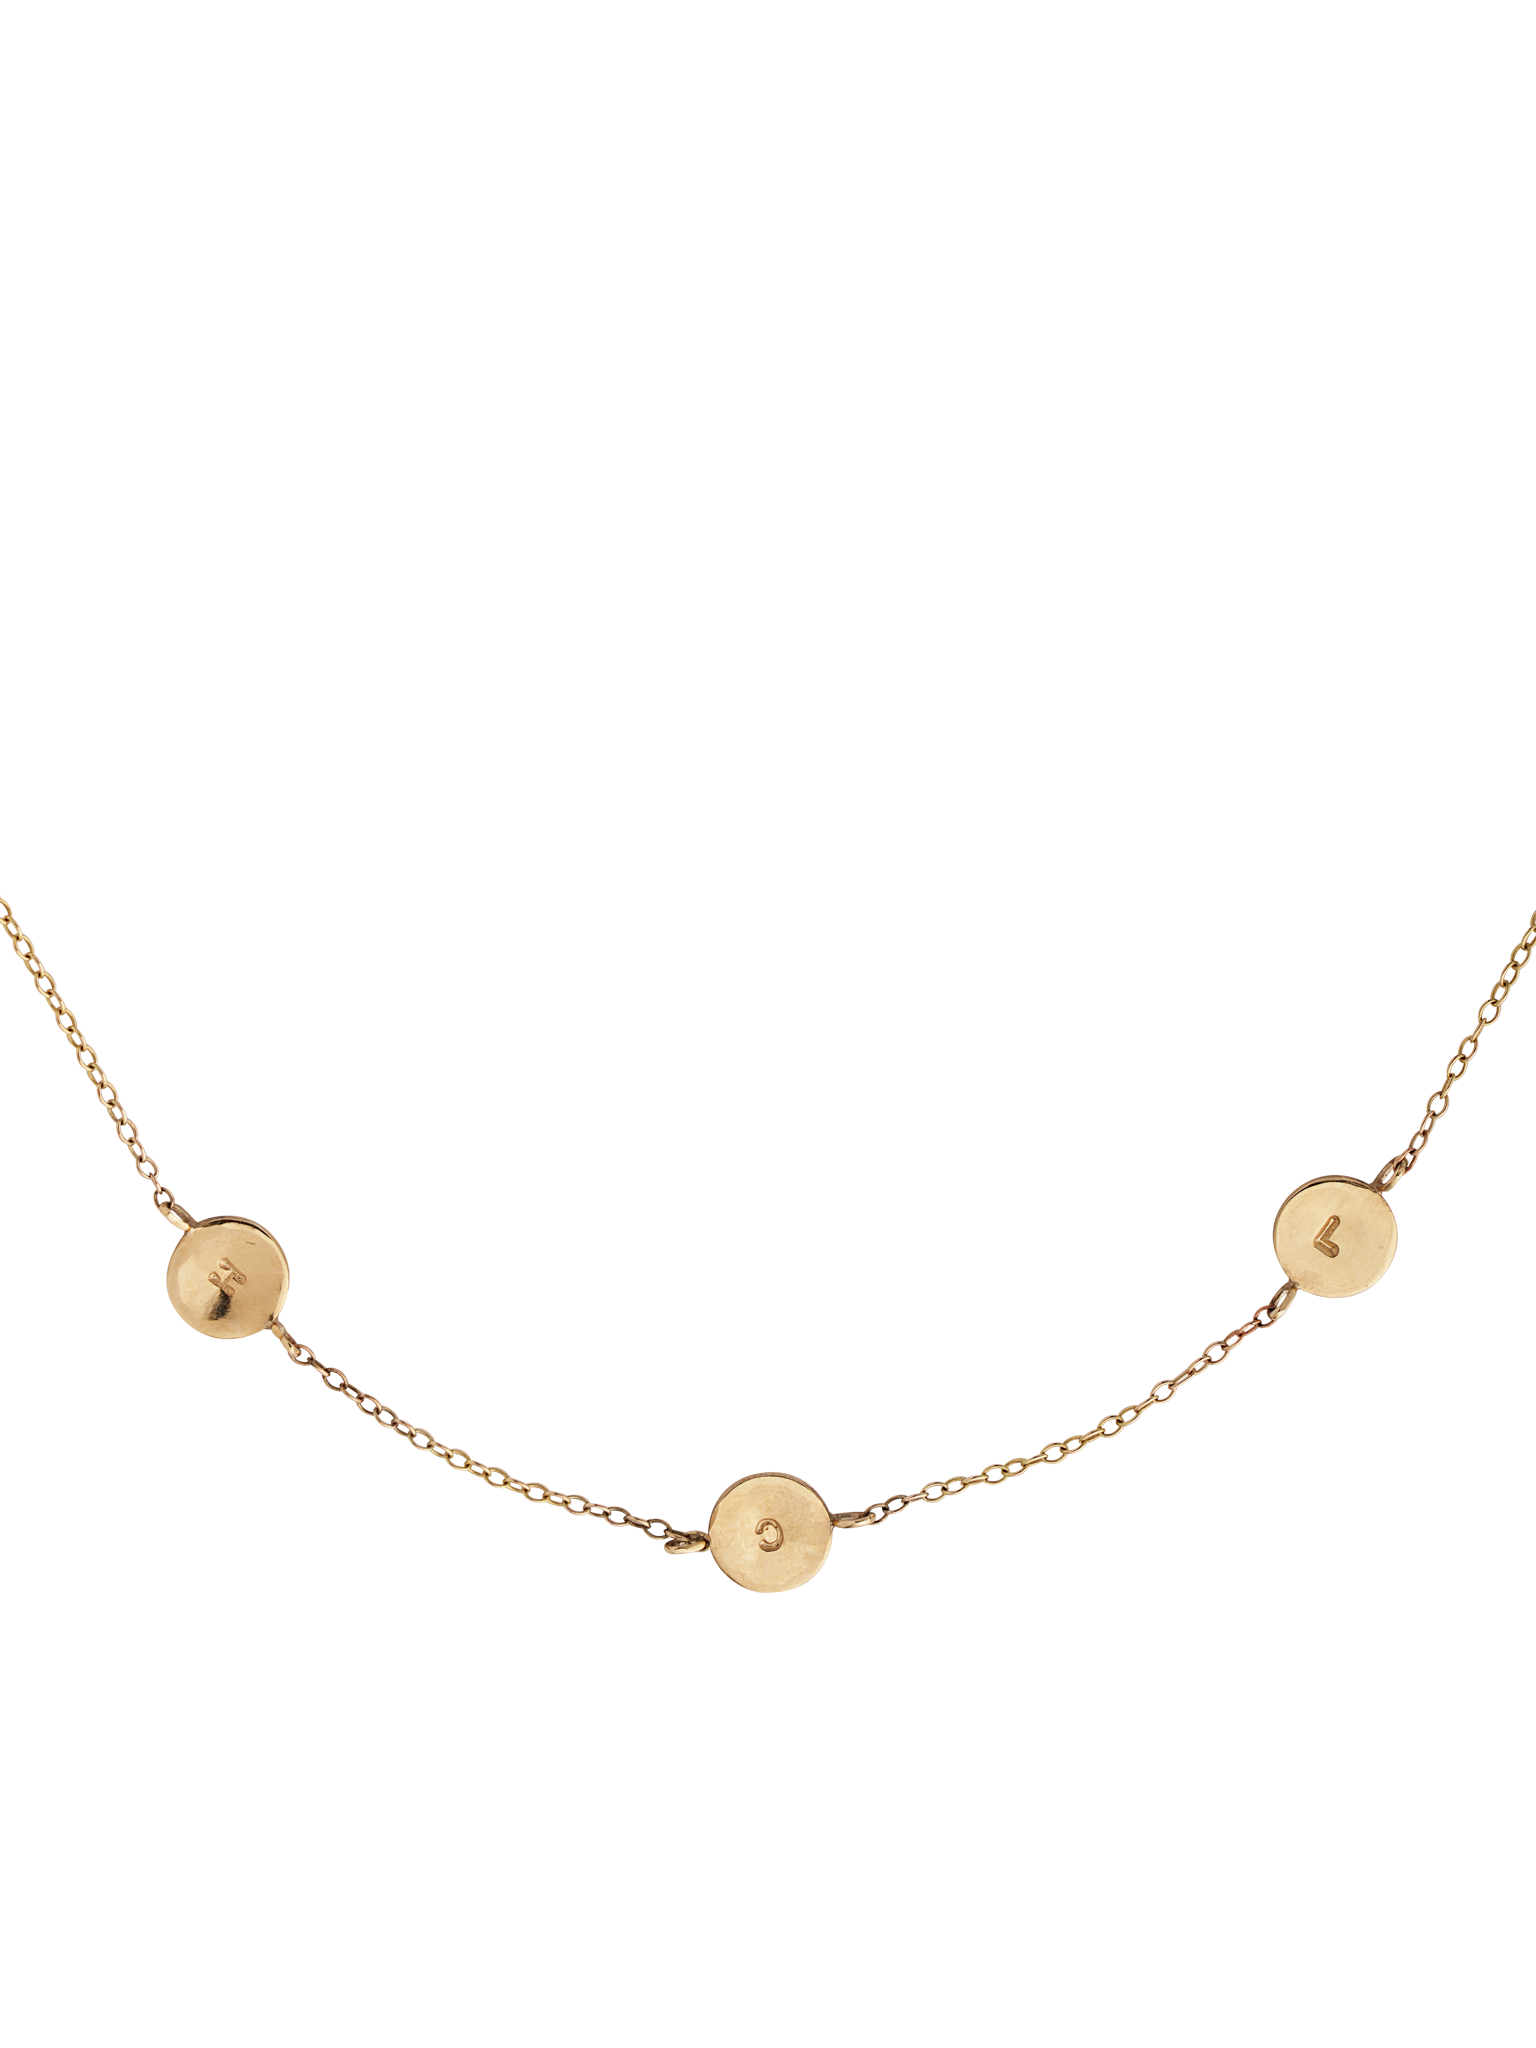 Solid gold personalised station disc necklace